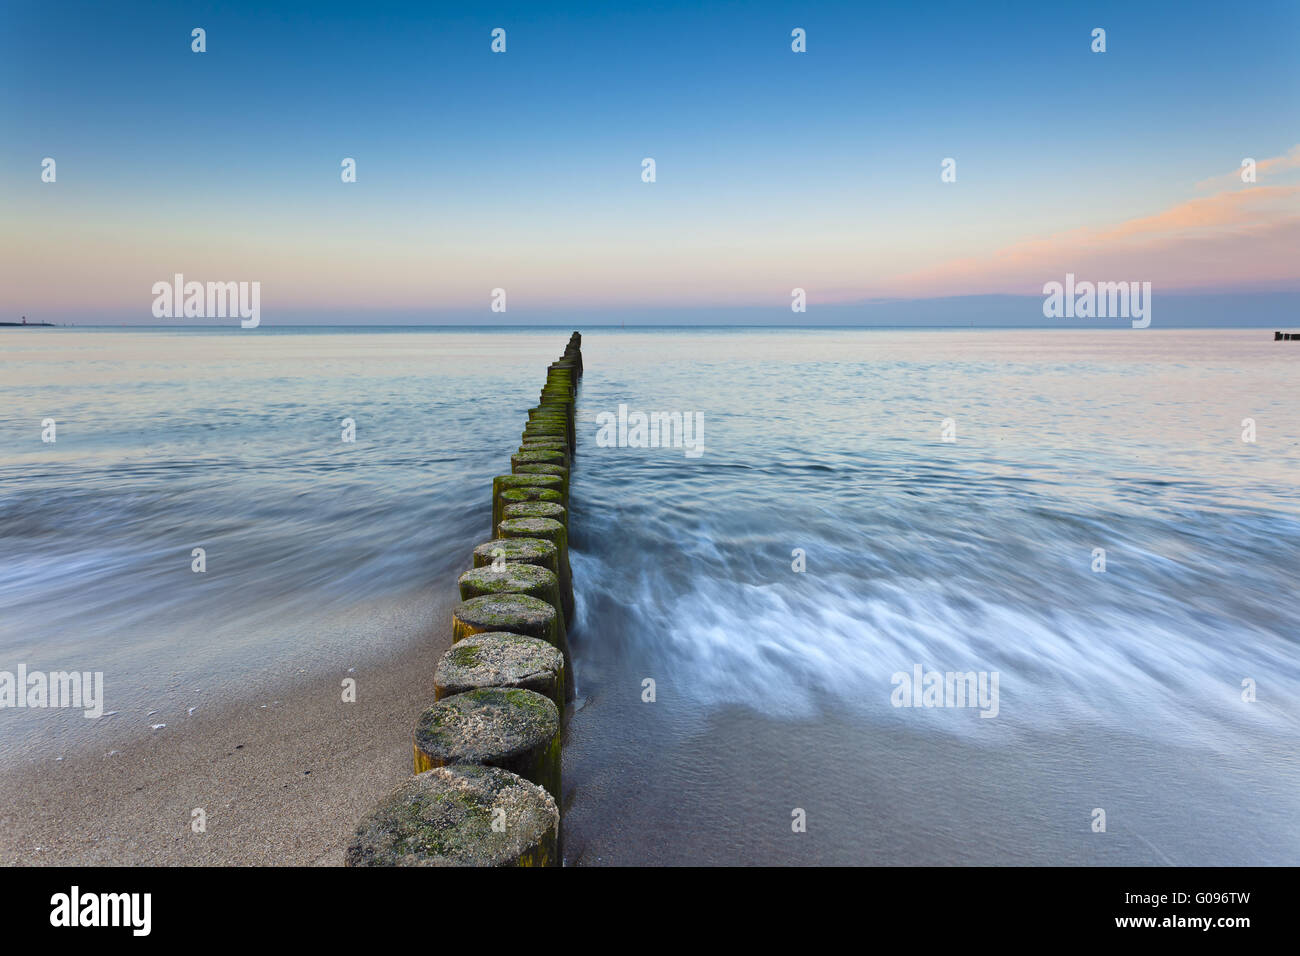 wooden groynes at the beach of german baltic sea Stock Photo